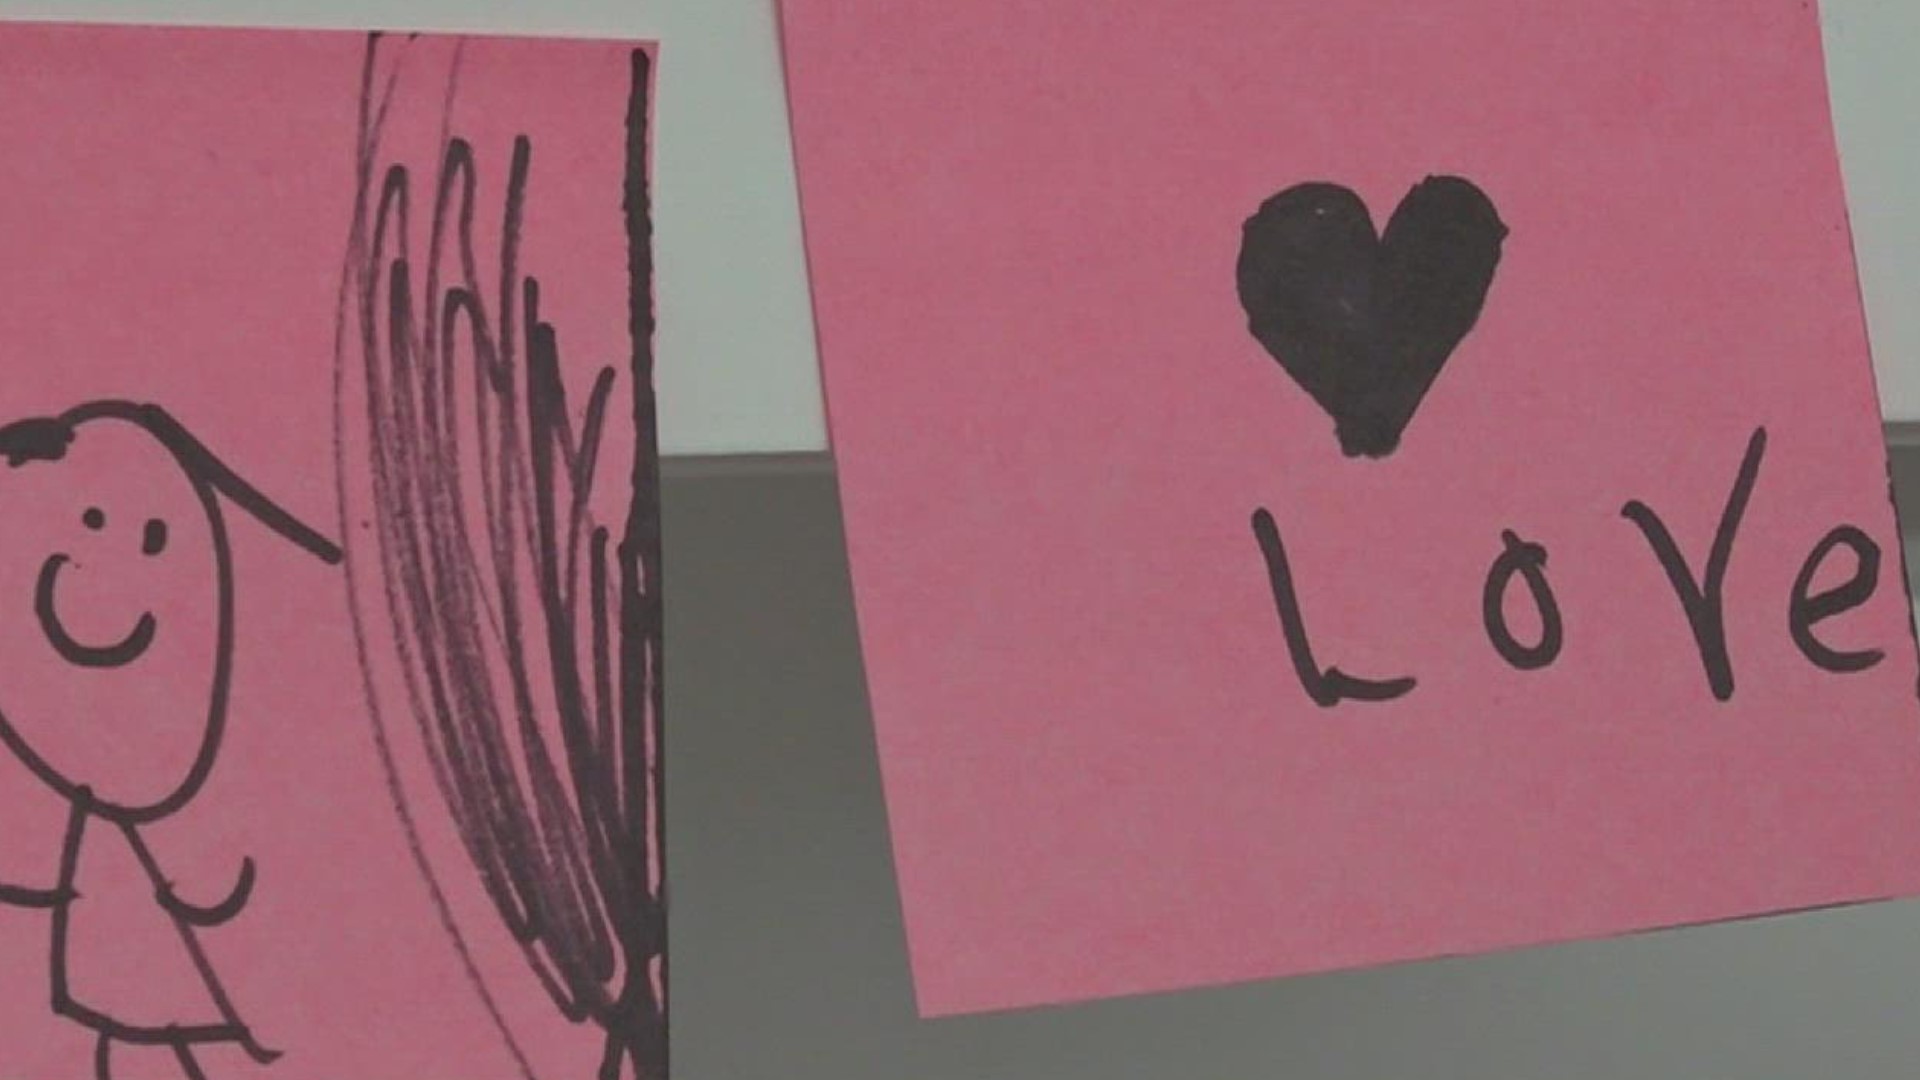 Valentine's Day is meant to be a day of love, but for some it can mean the opposite. We spoke with a local mom and columnist about the importance of mental health.